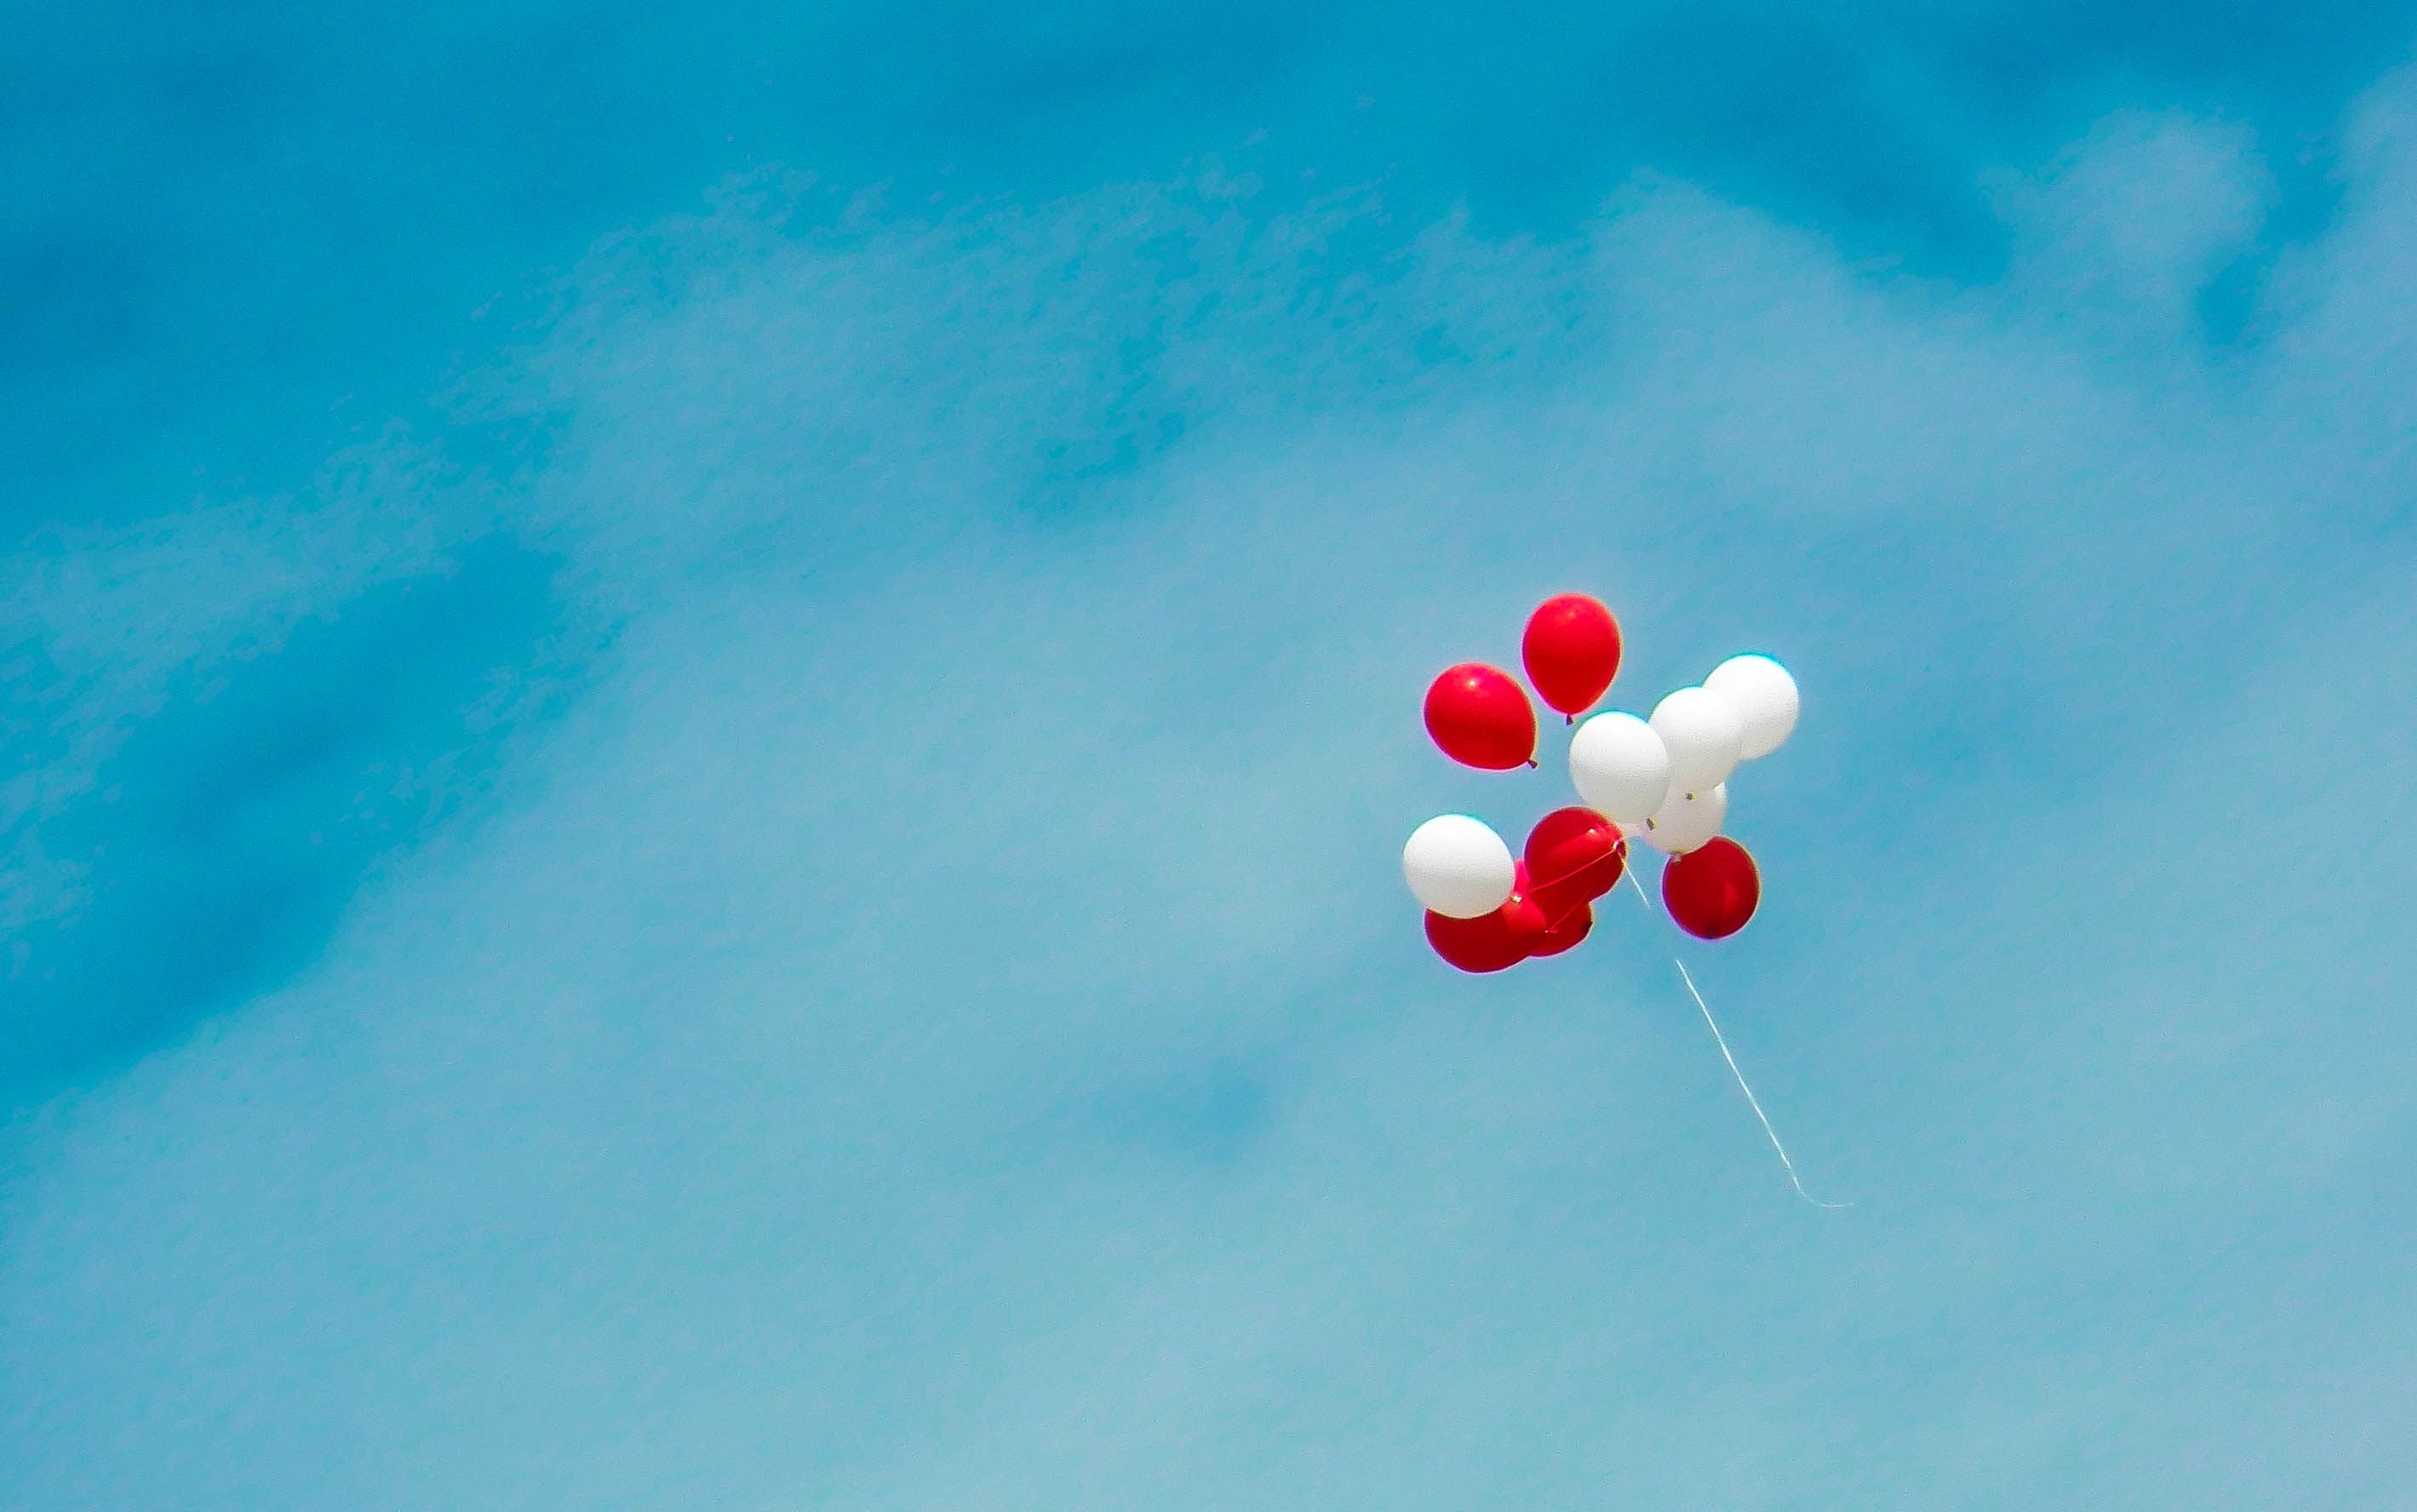 A red and white balloon flying in the sky - Sky, balloons